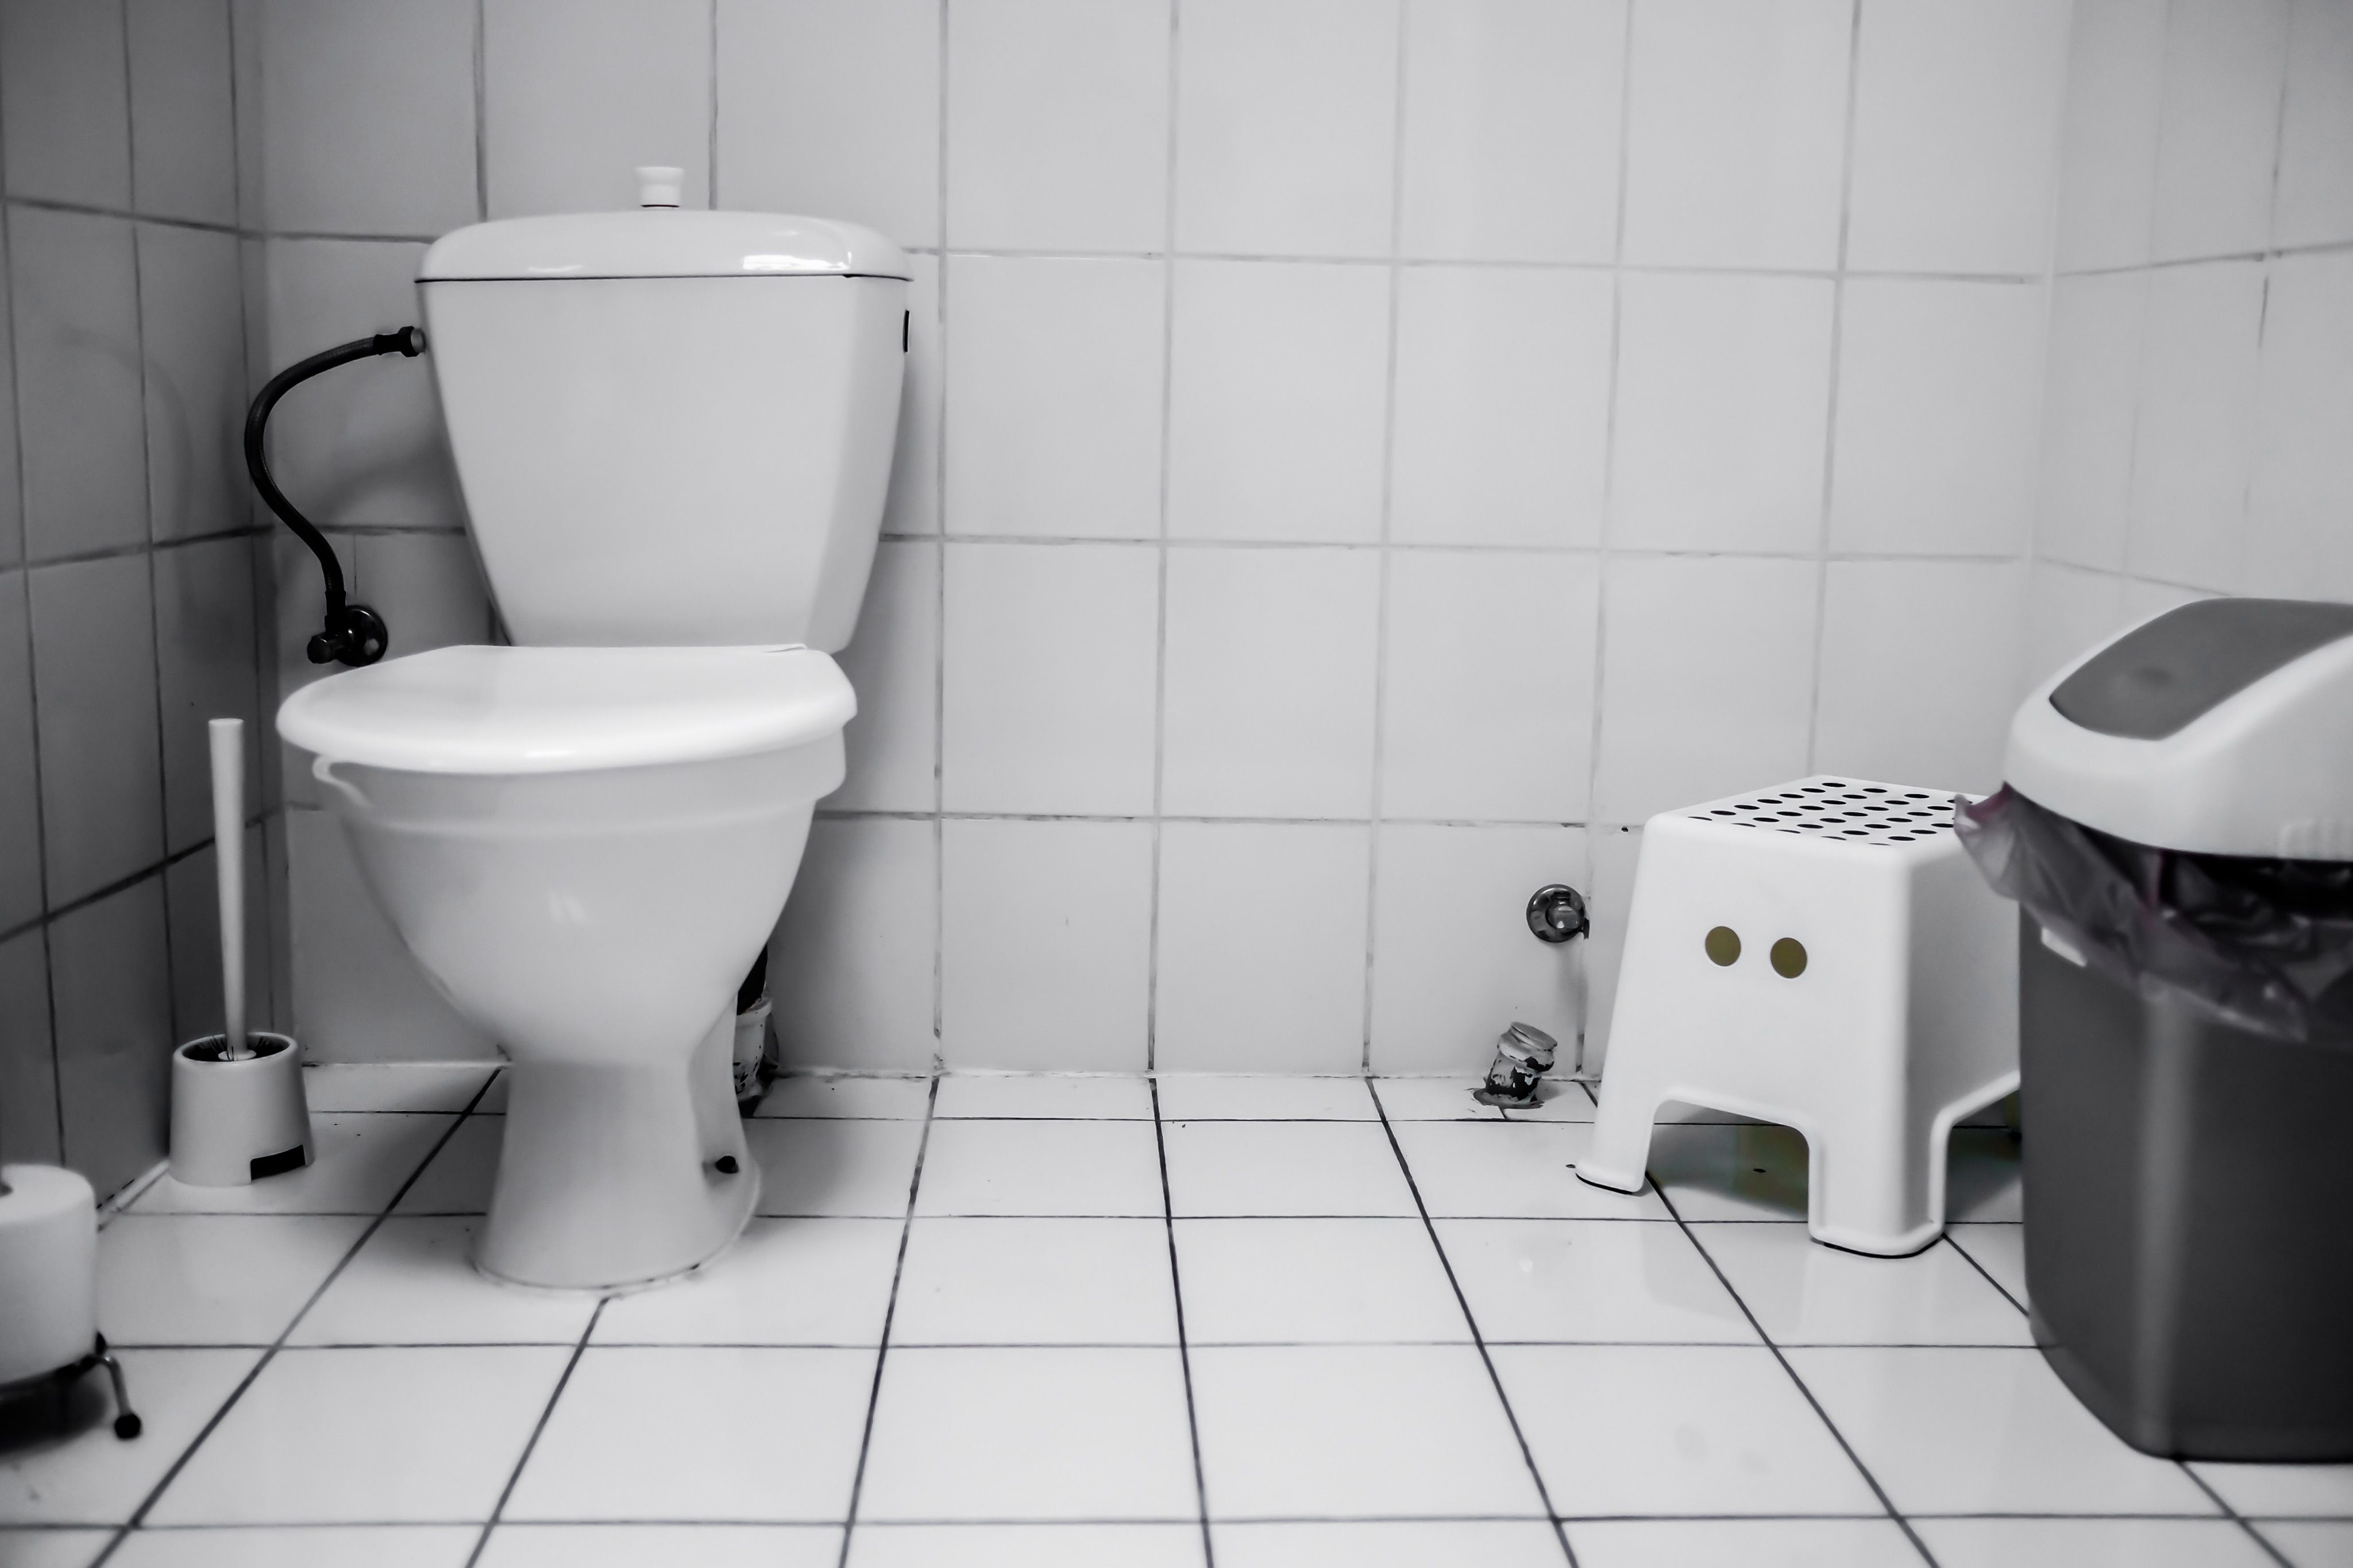 How To Stop Your Toilet From Rocking